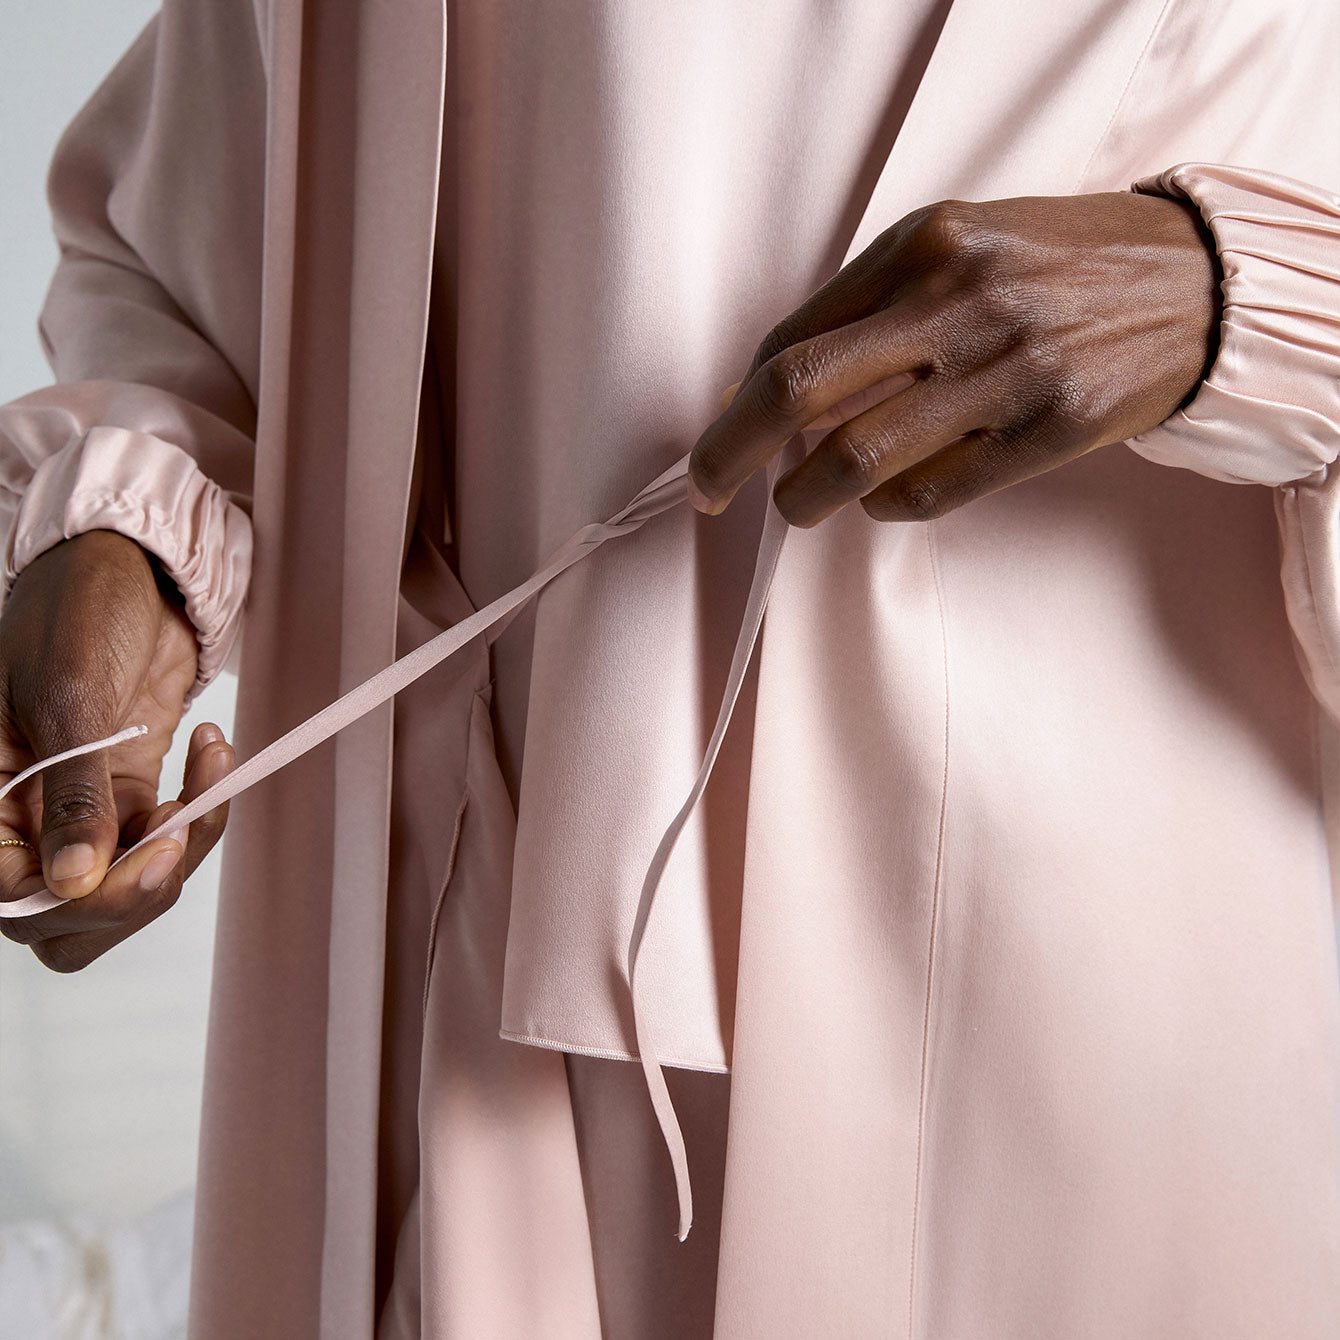 Washable Silk Robe - #Delicate Pink